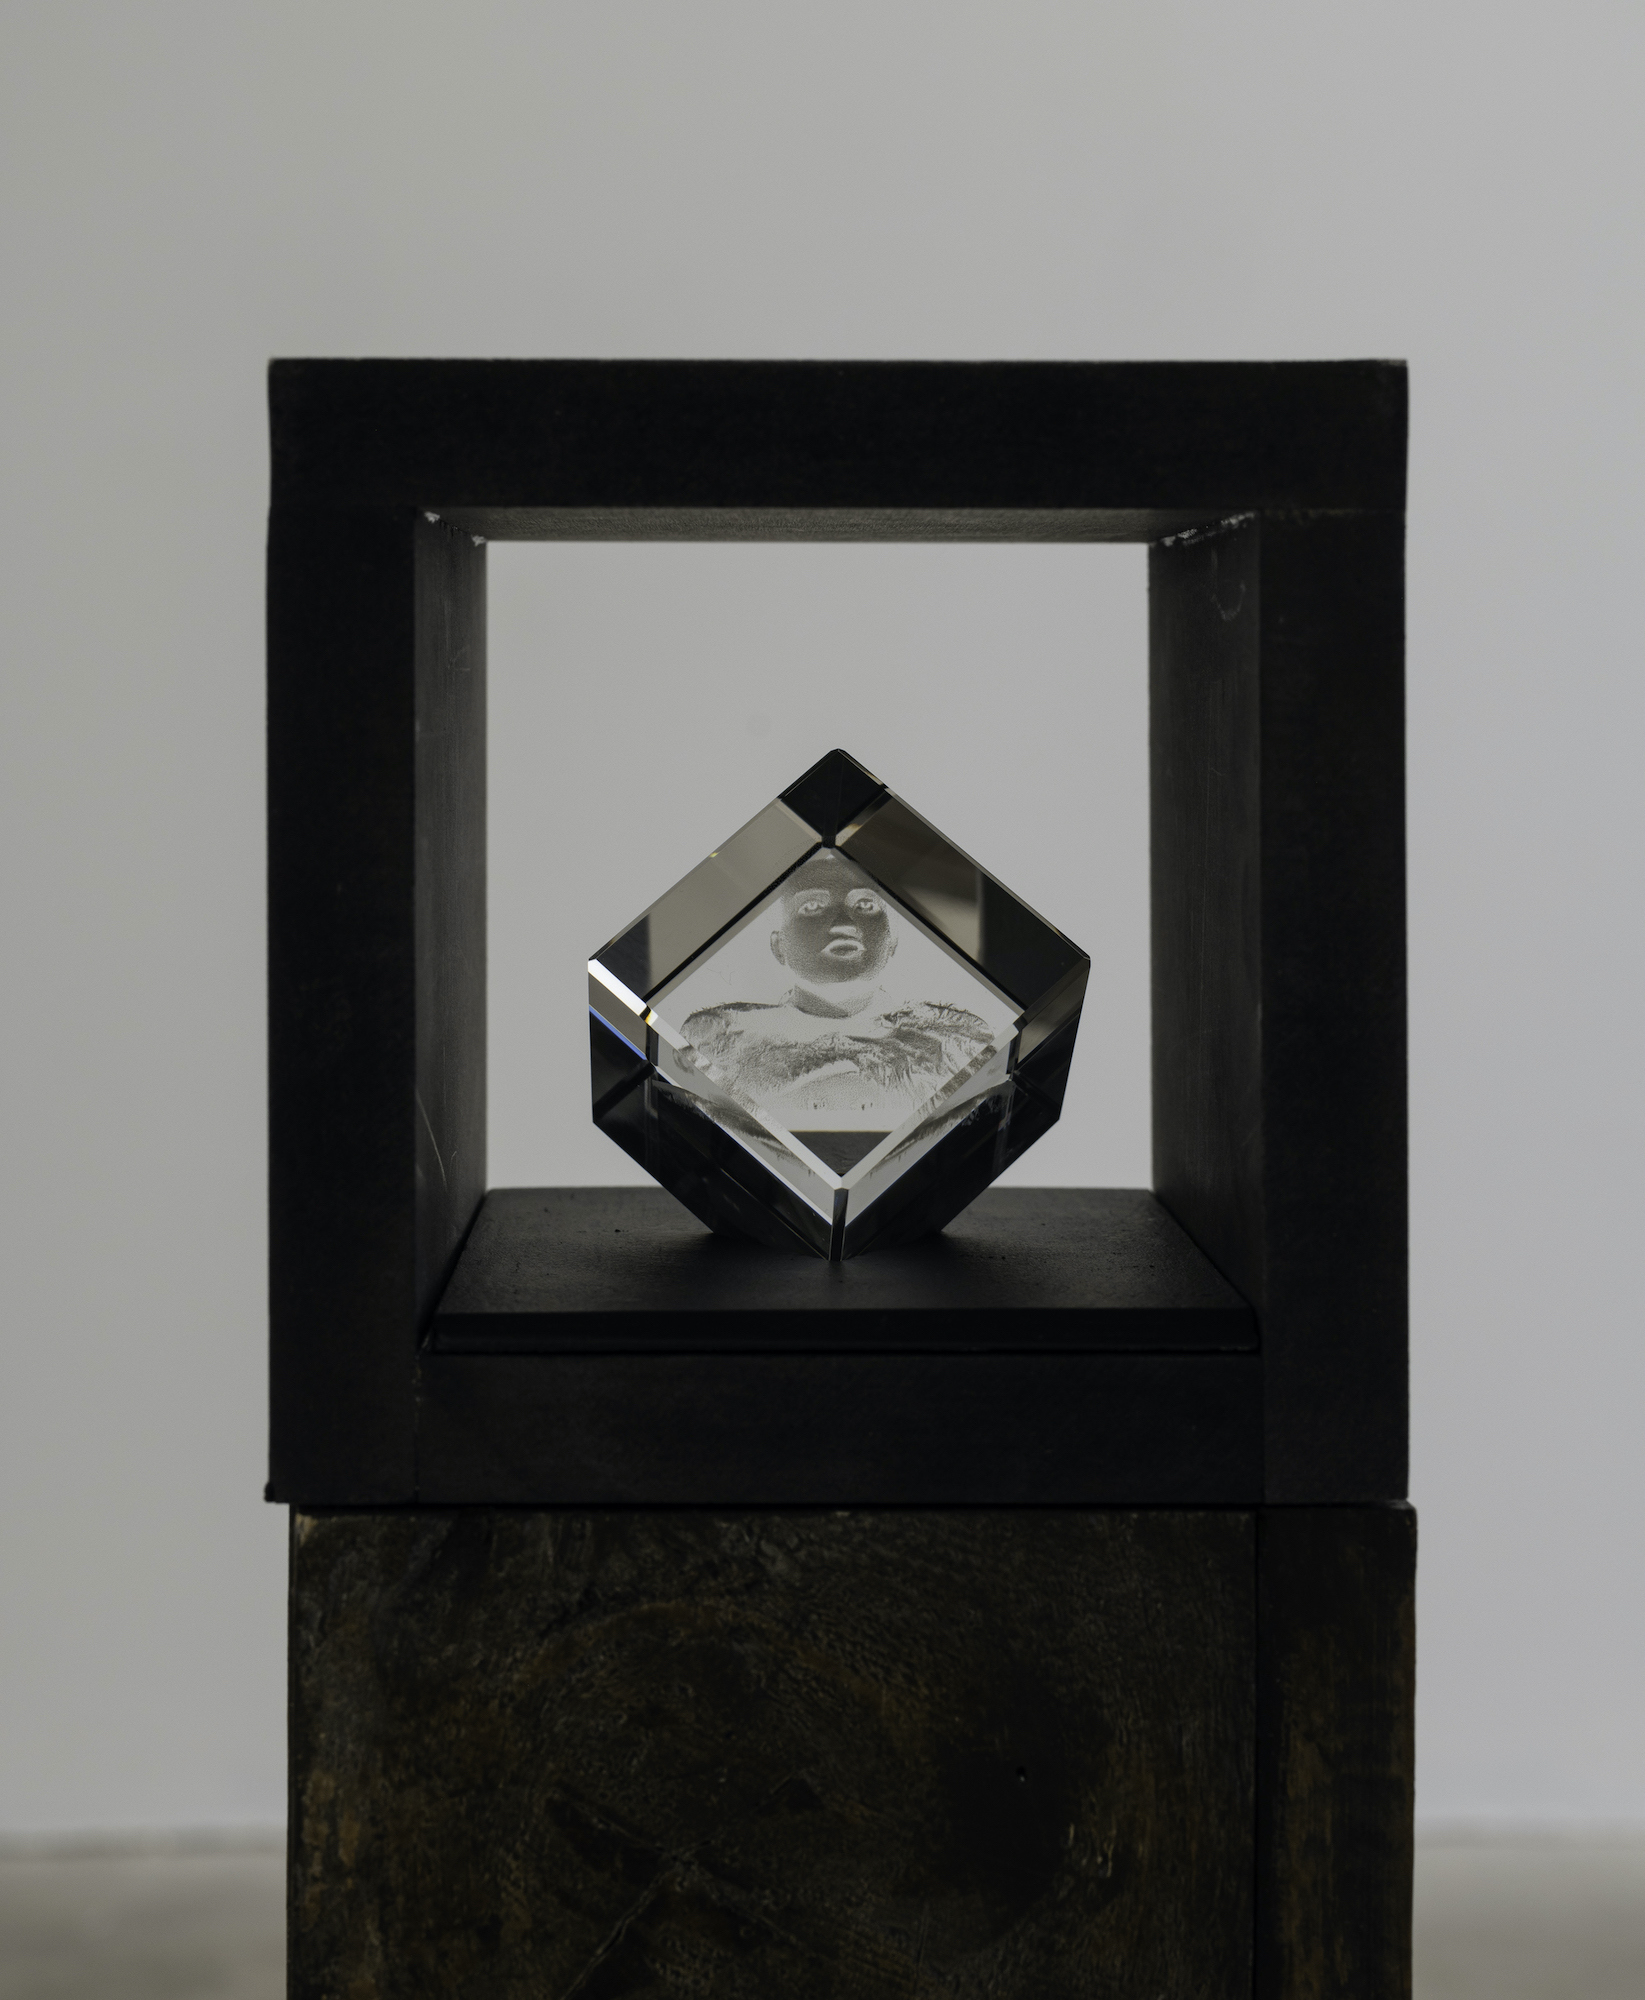 Small laser - cut glass cube sculptures nested inside the top section of brown pedestals depicting a portrait of a person